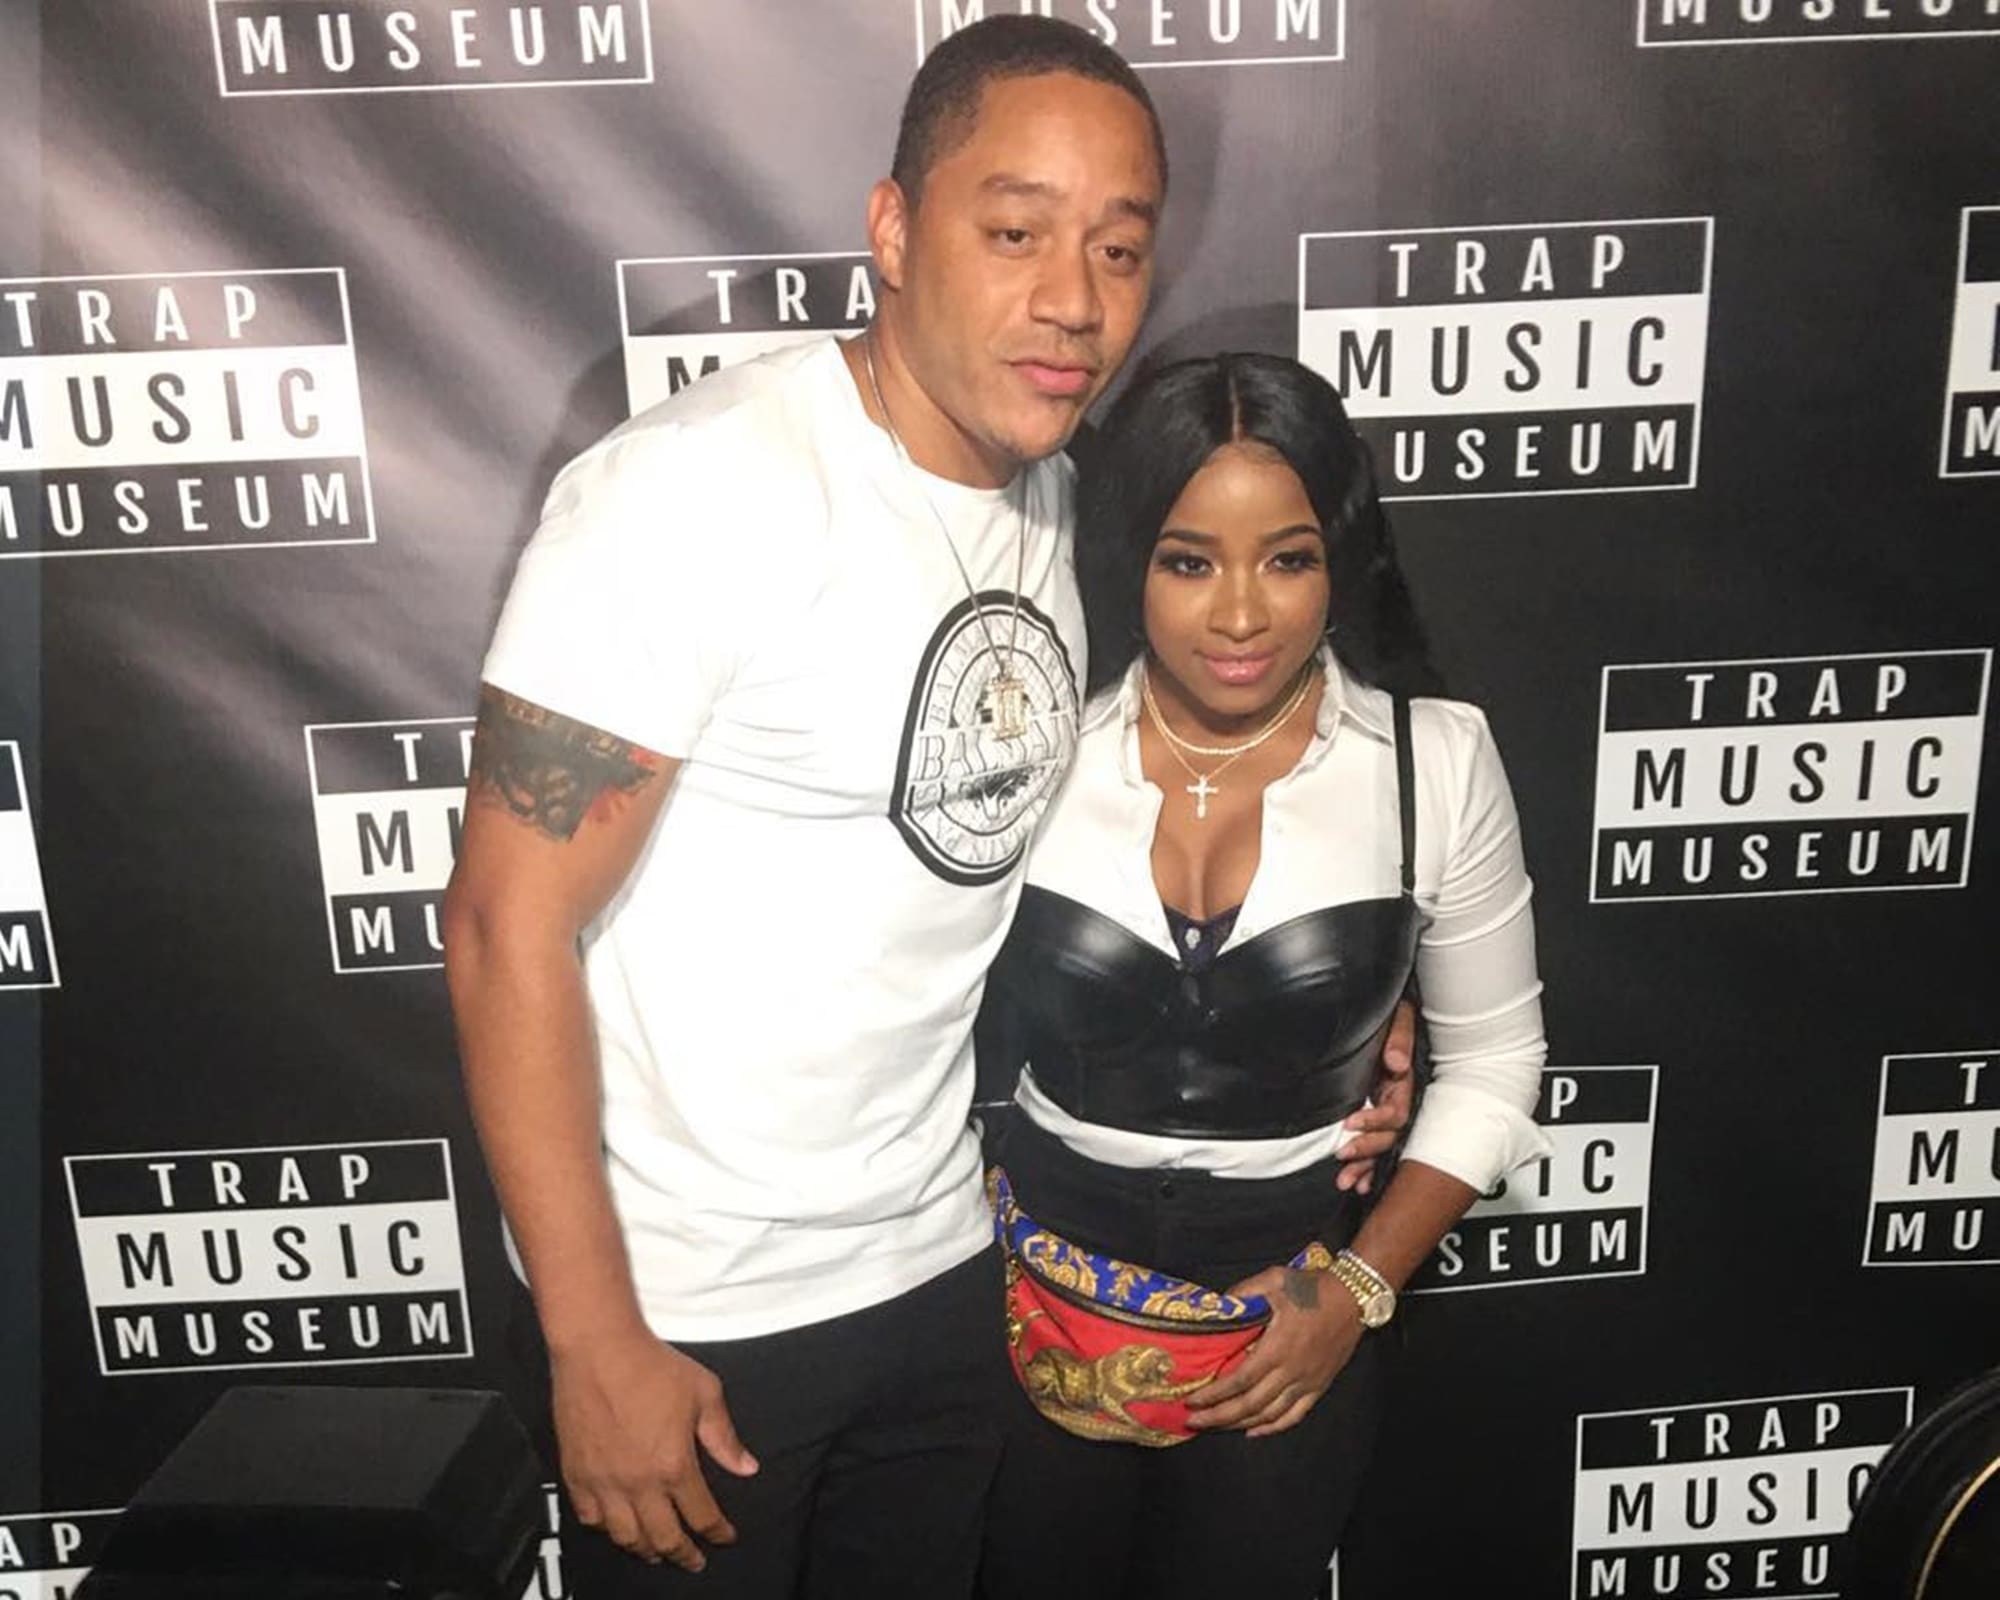 Robert Rushing Makes Fun Of Toya Wright For Her Refusal To Get Married - People Beg Toya To Accept His Proposal Already